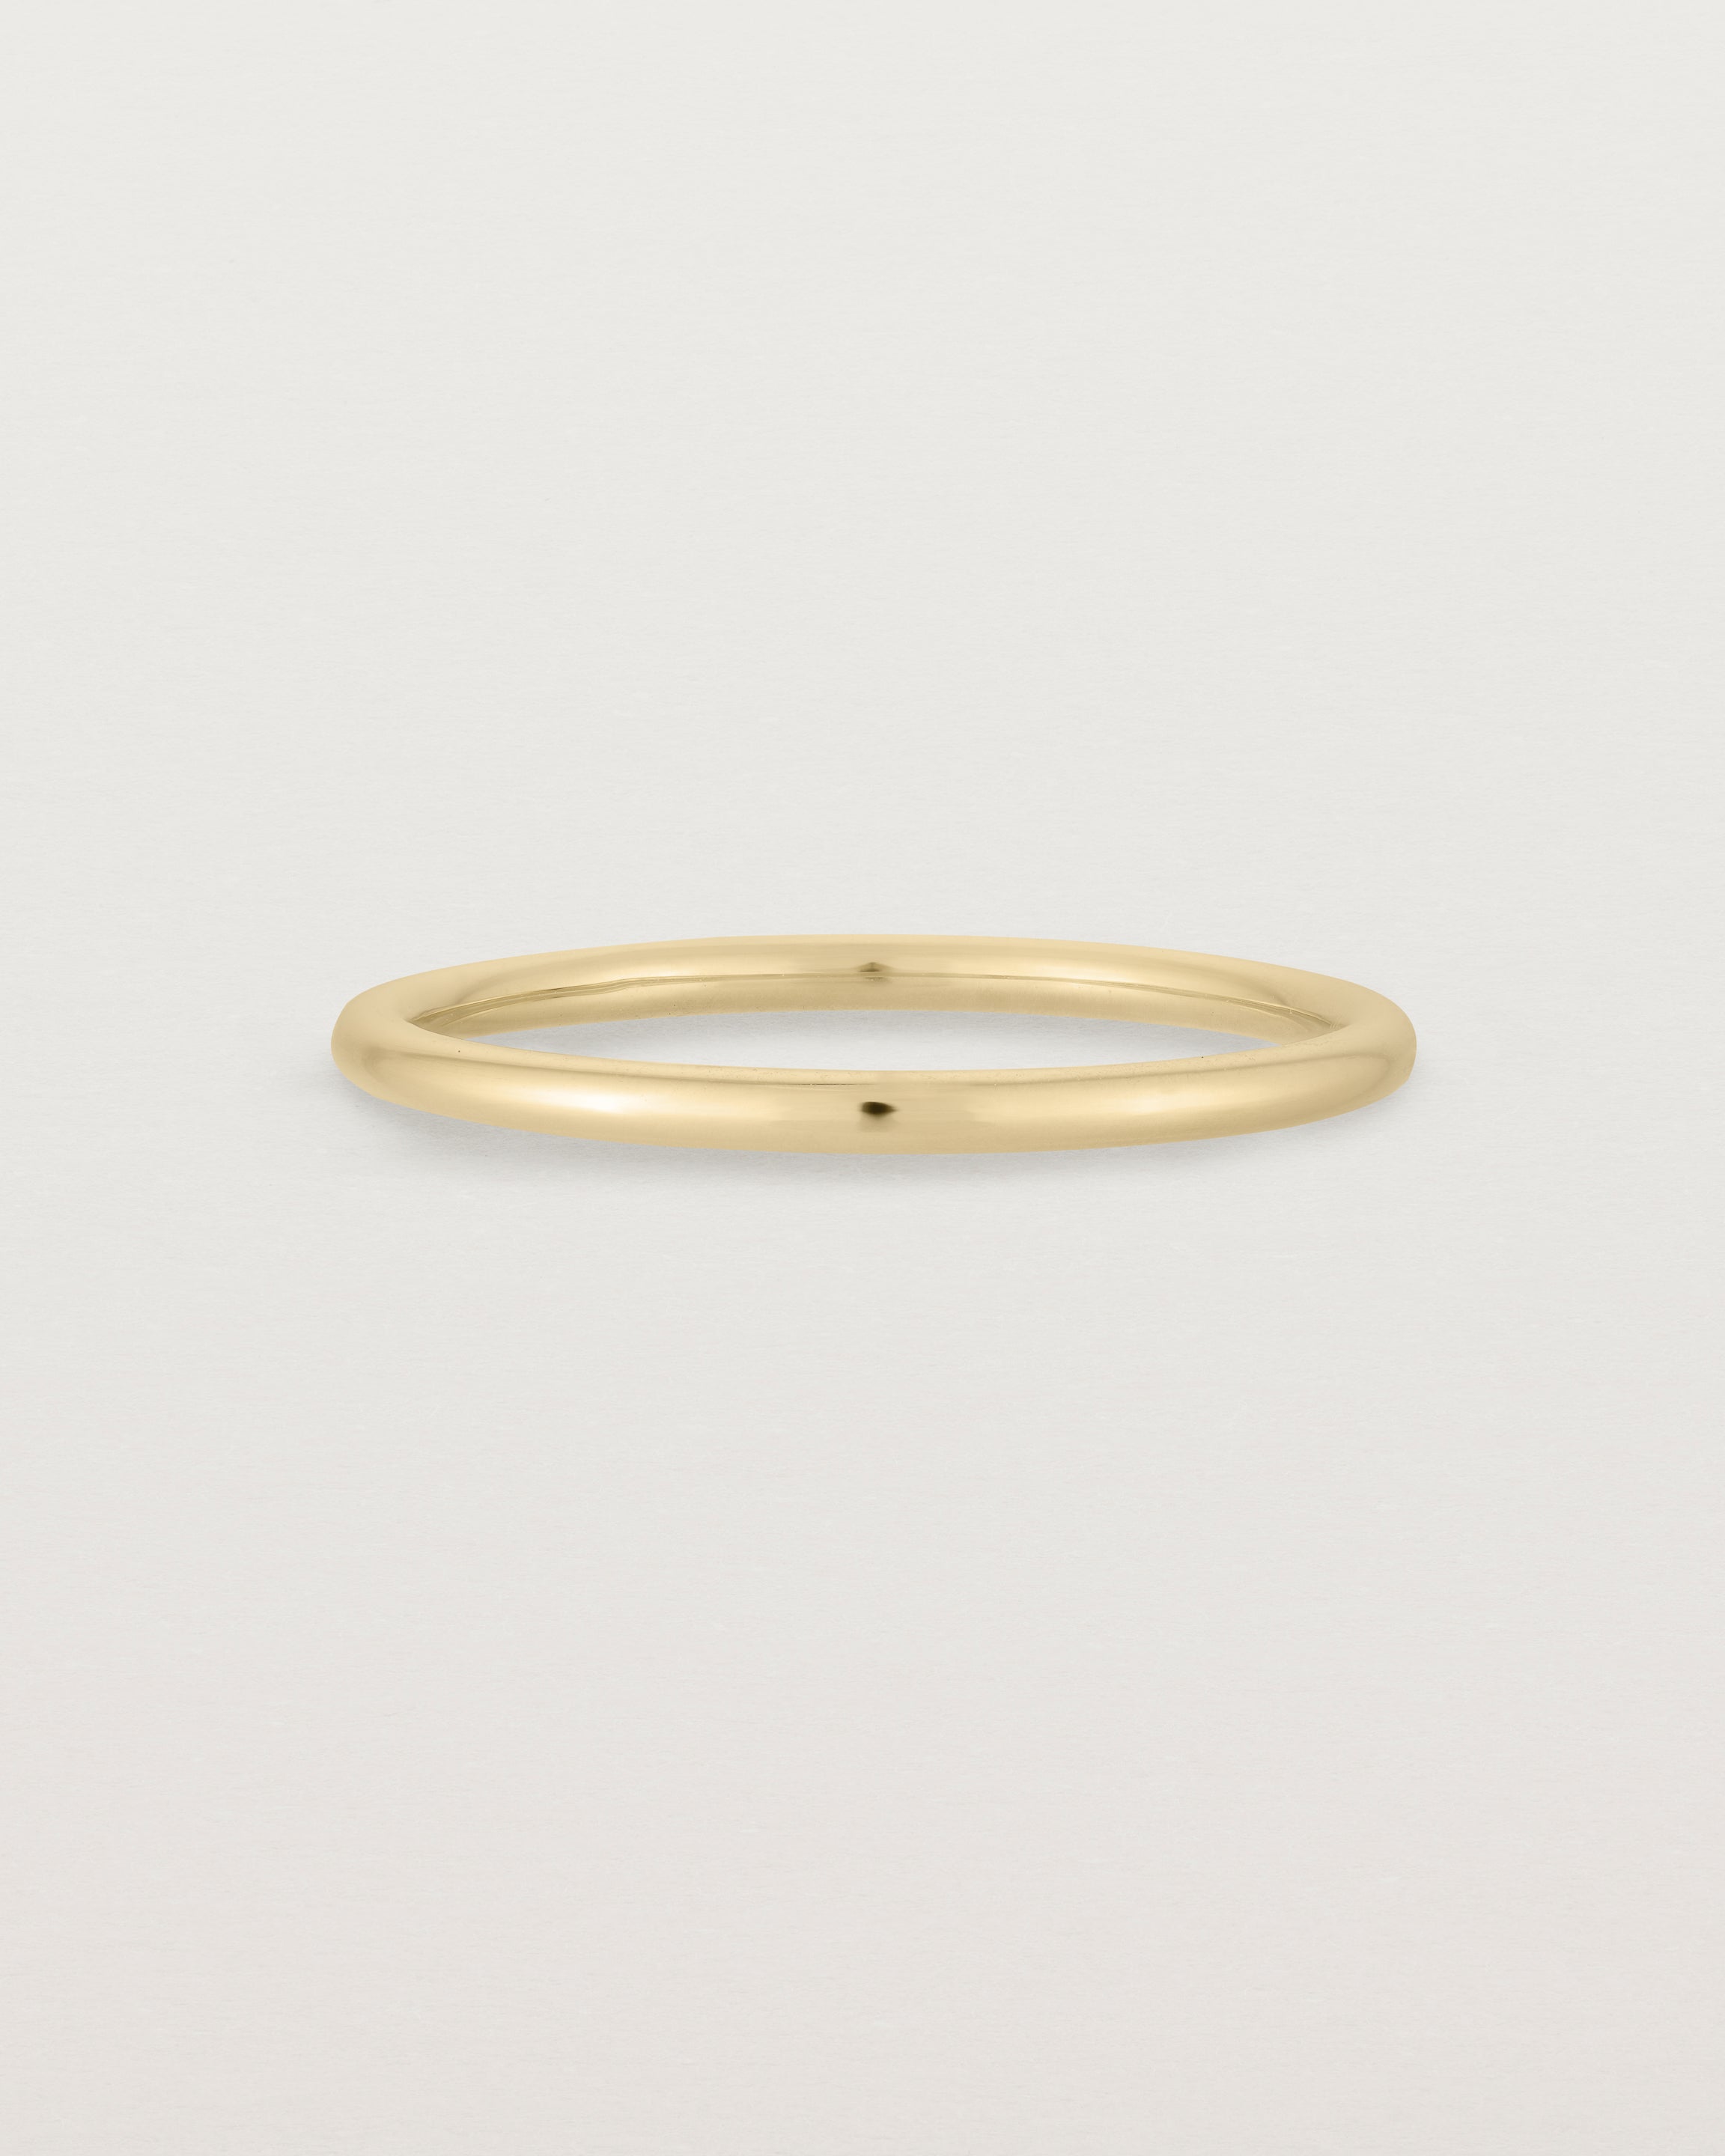 Our fine round wedding band in yellow gold